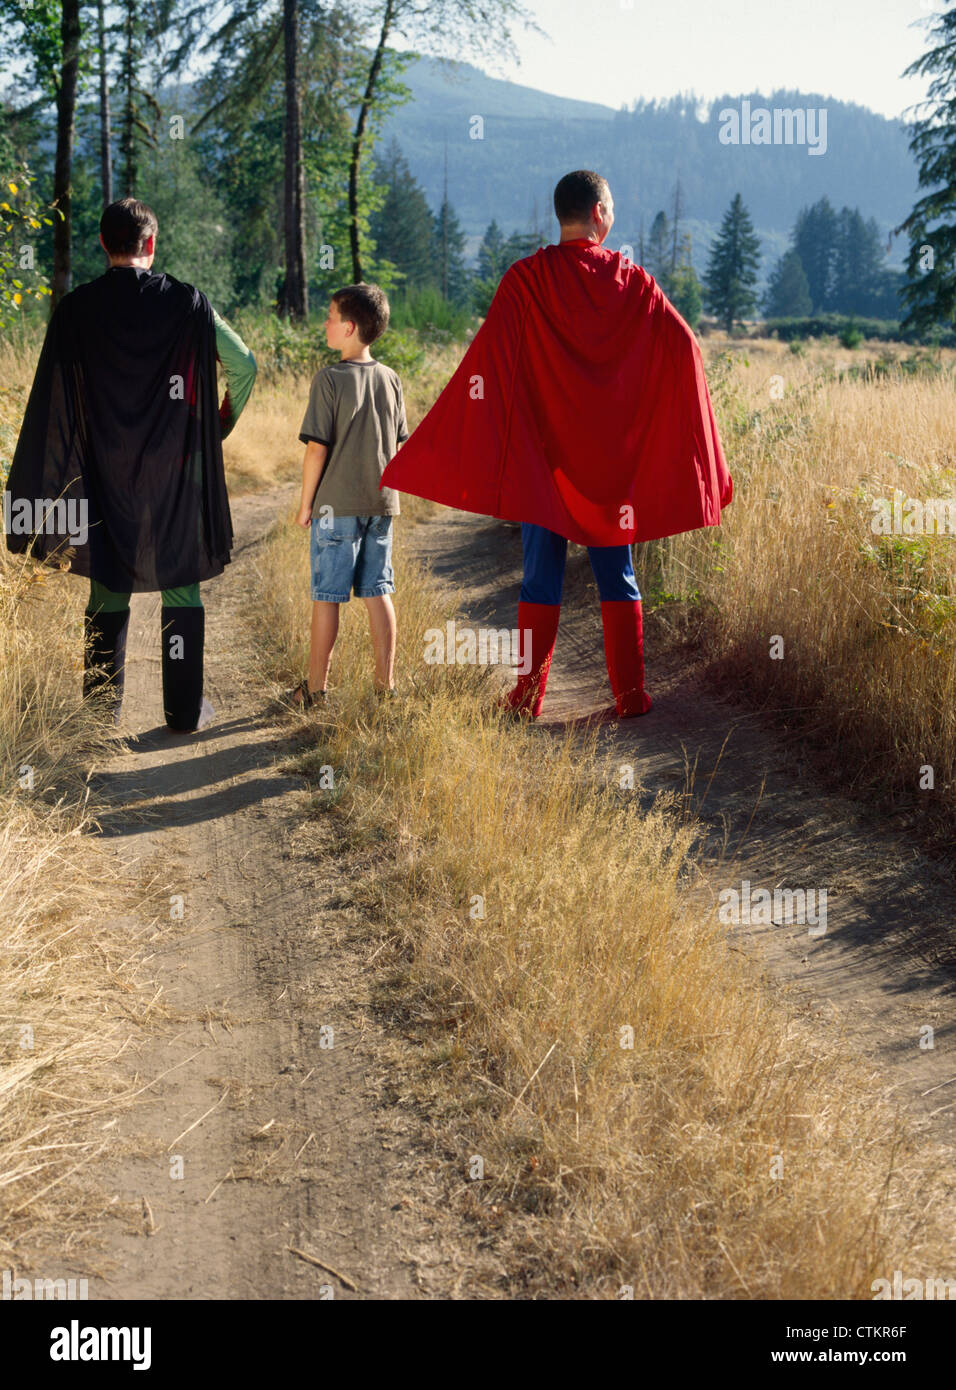 A young boy standing with superheroes Stock Photo